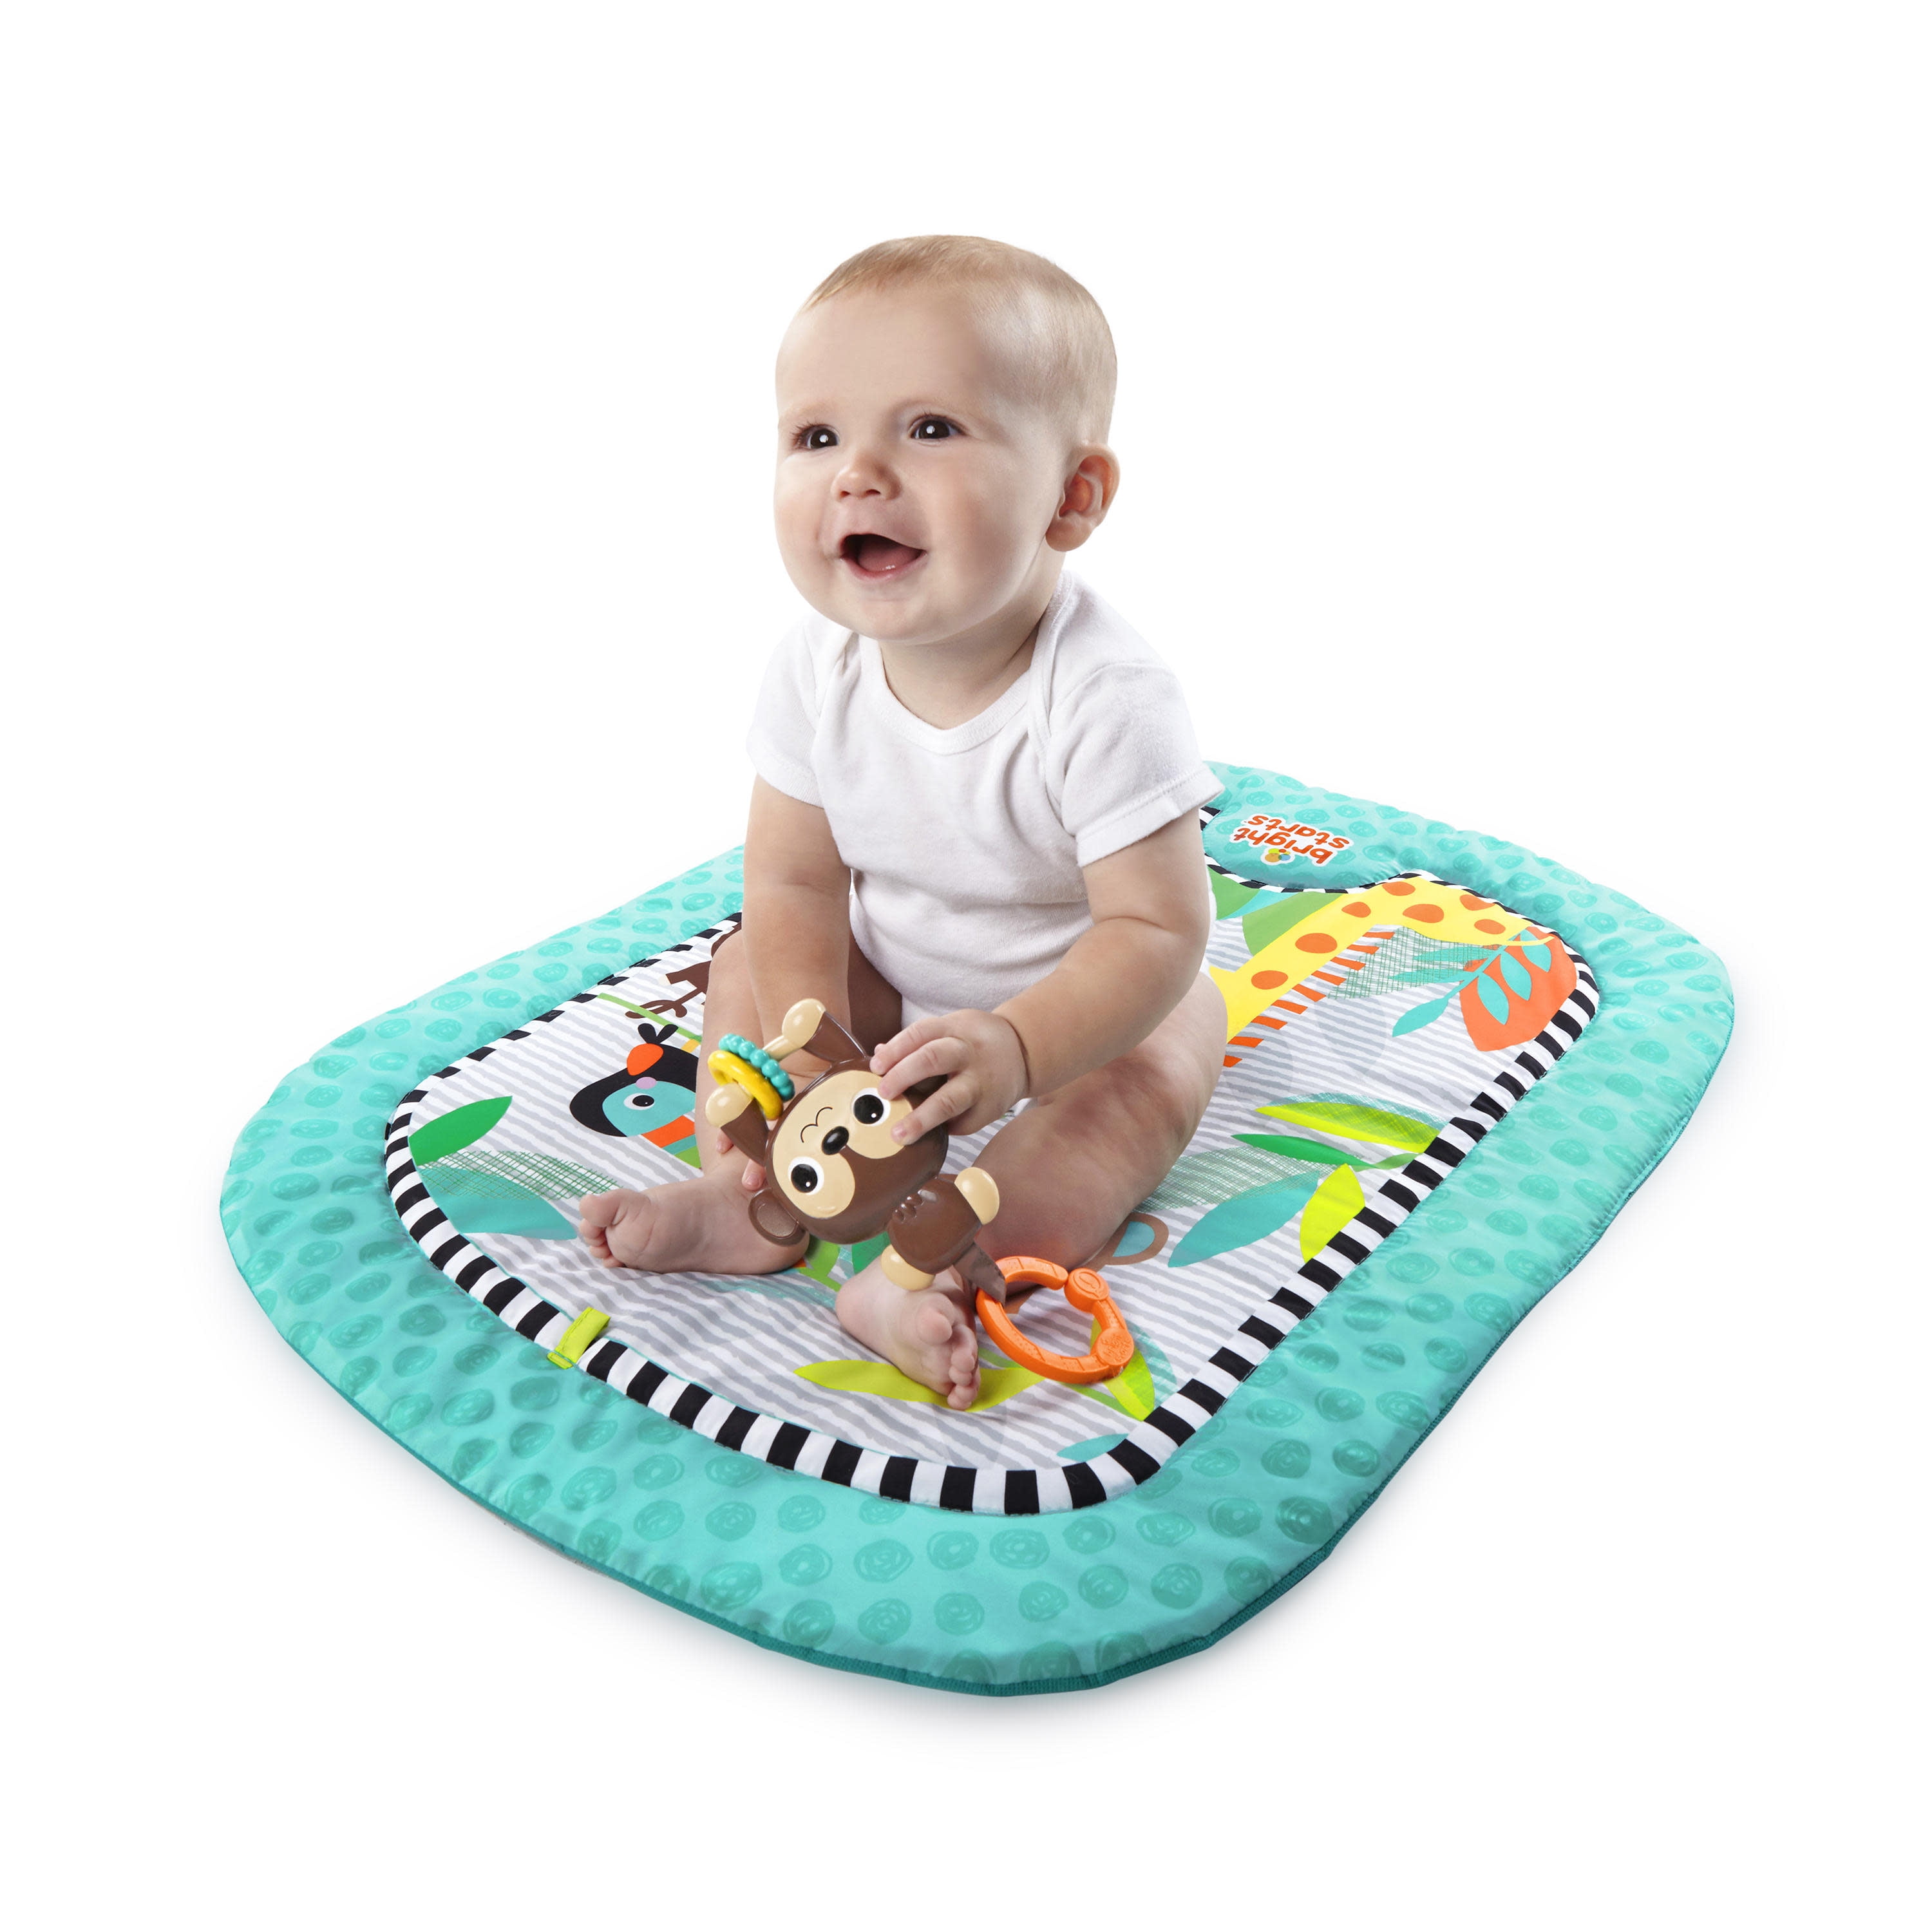 When Should You Start Tummy Time With Your Baby? - Giggle Magazine